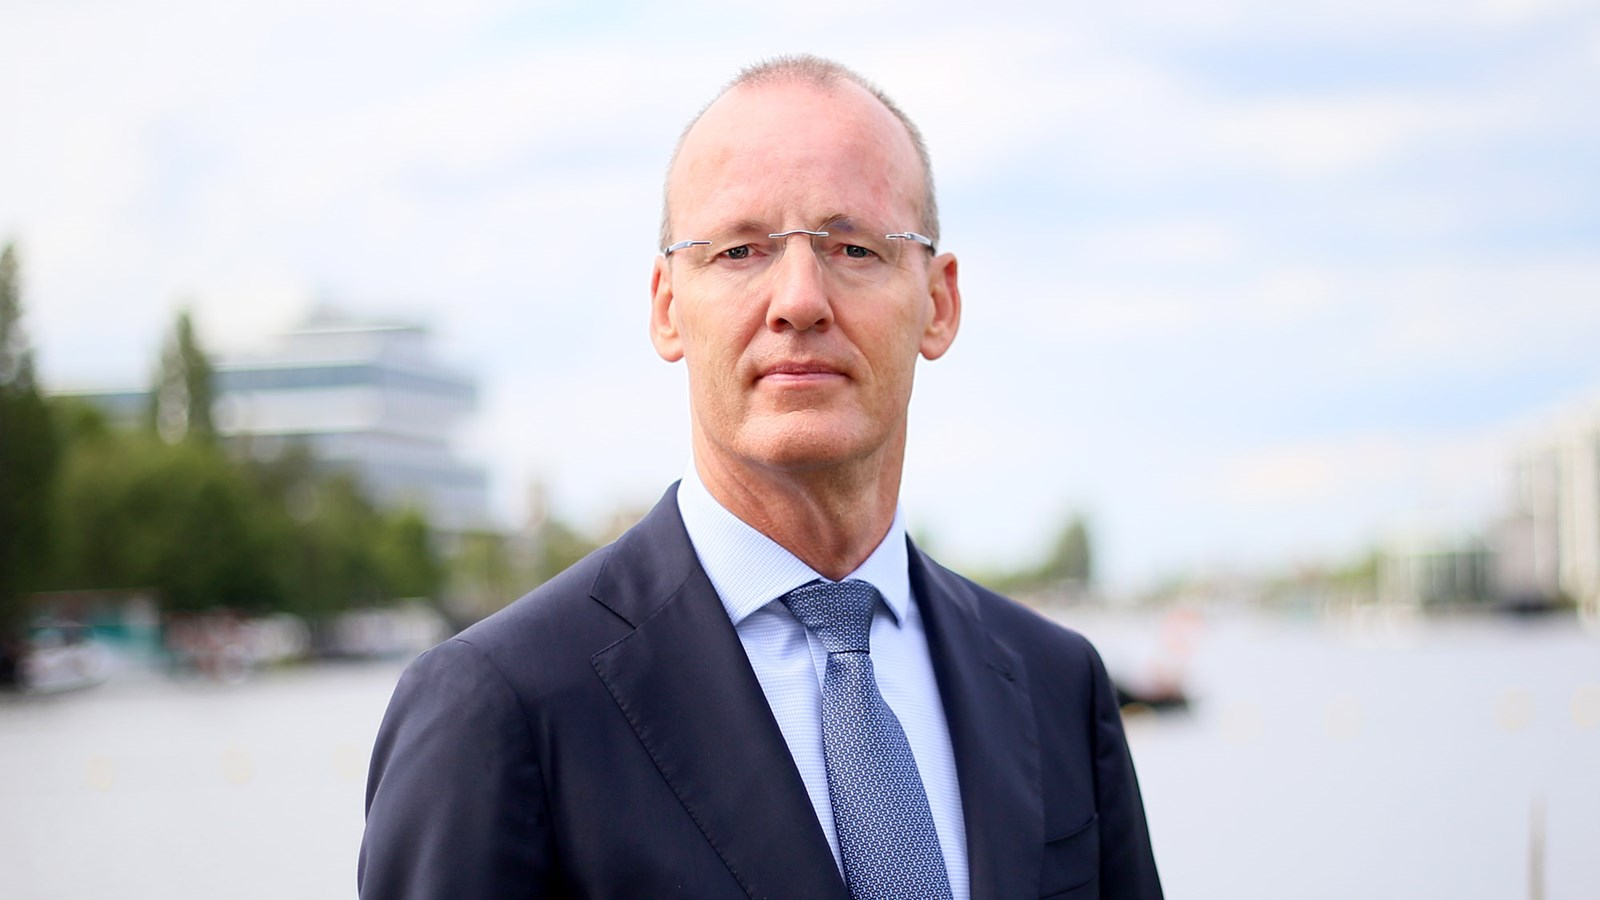 Klaas Knot takes office as FSB Chair